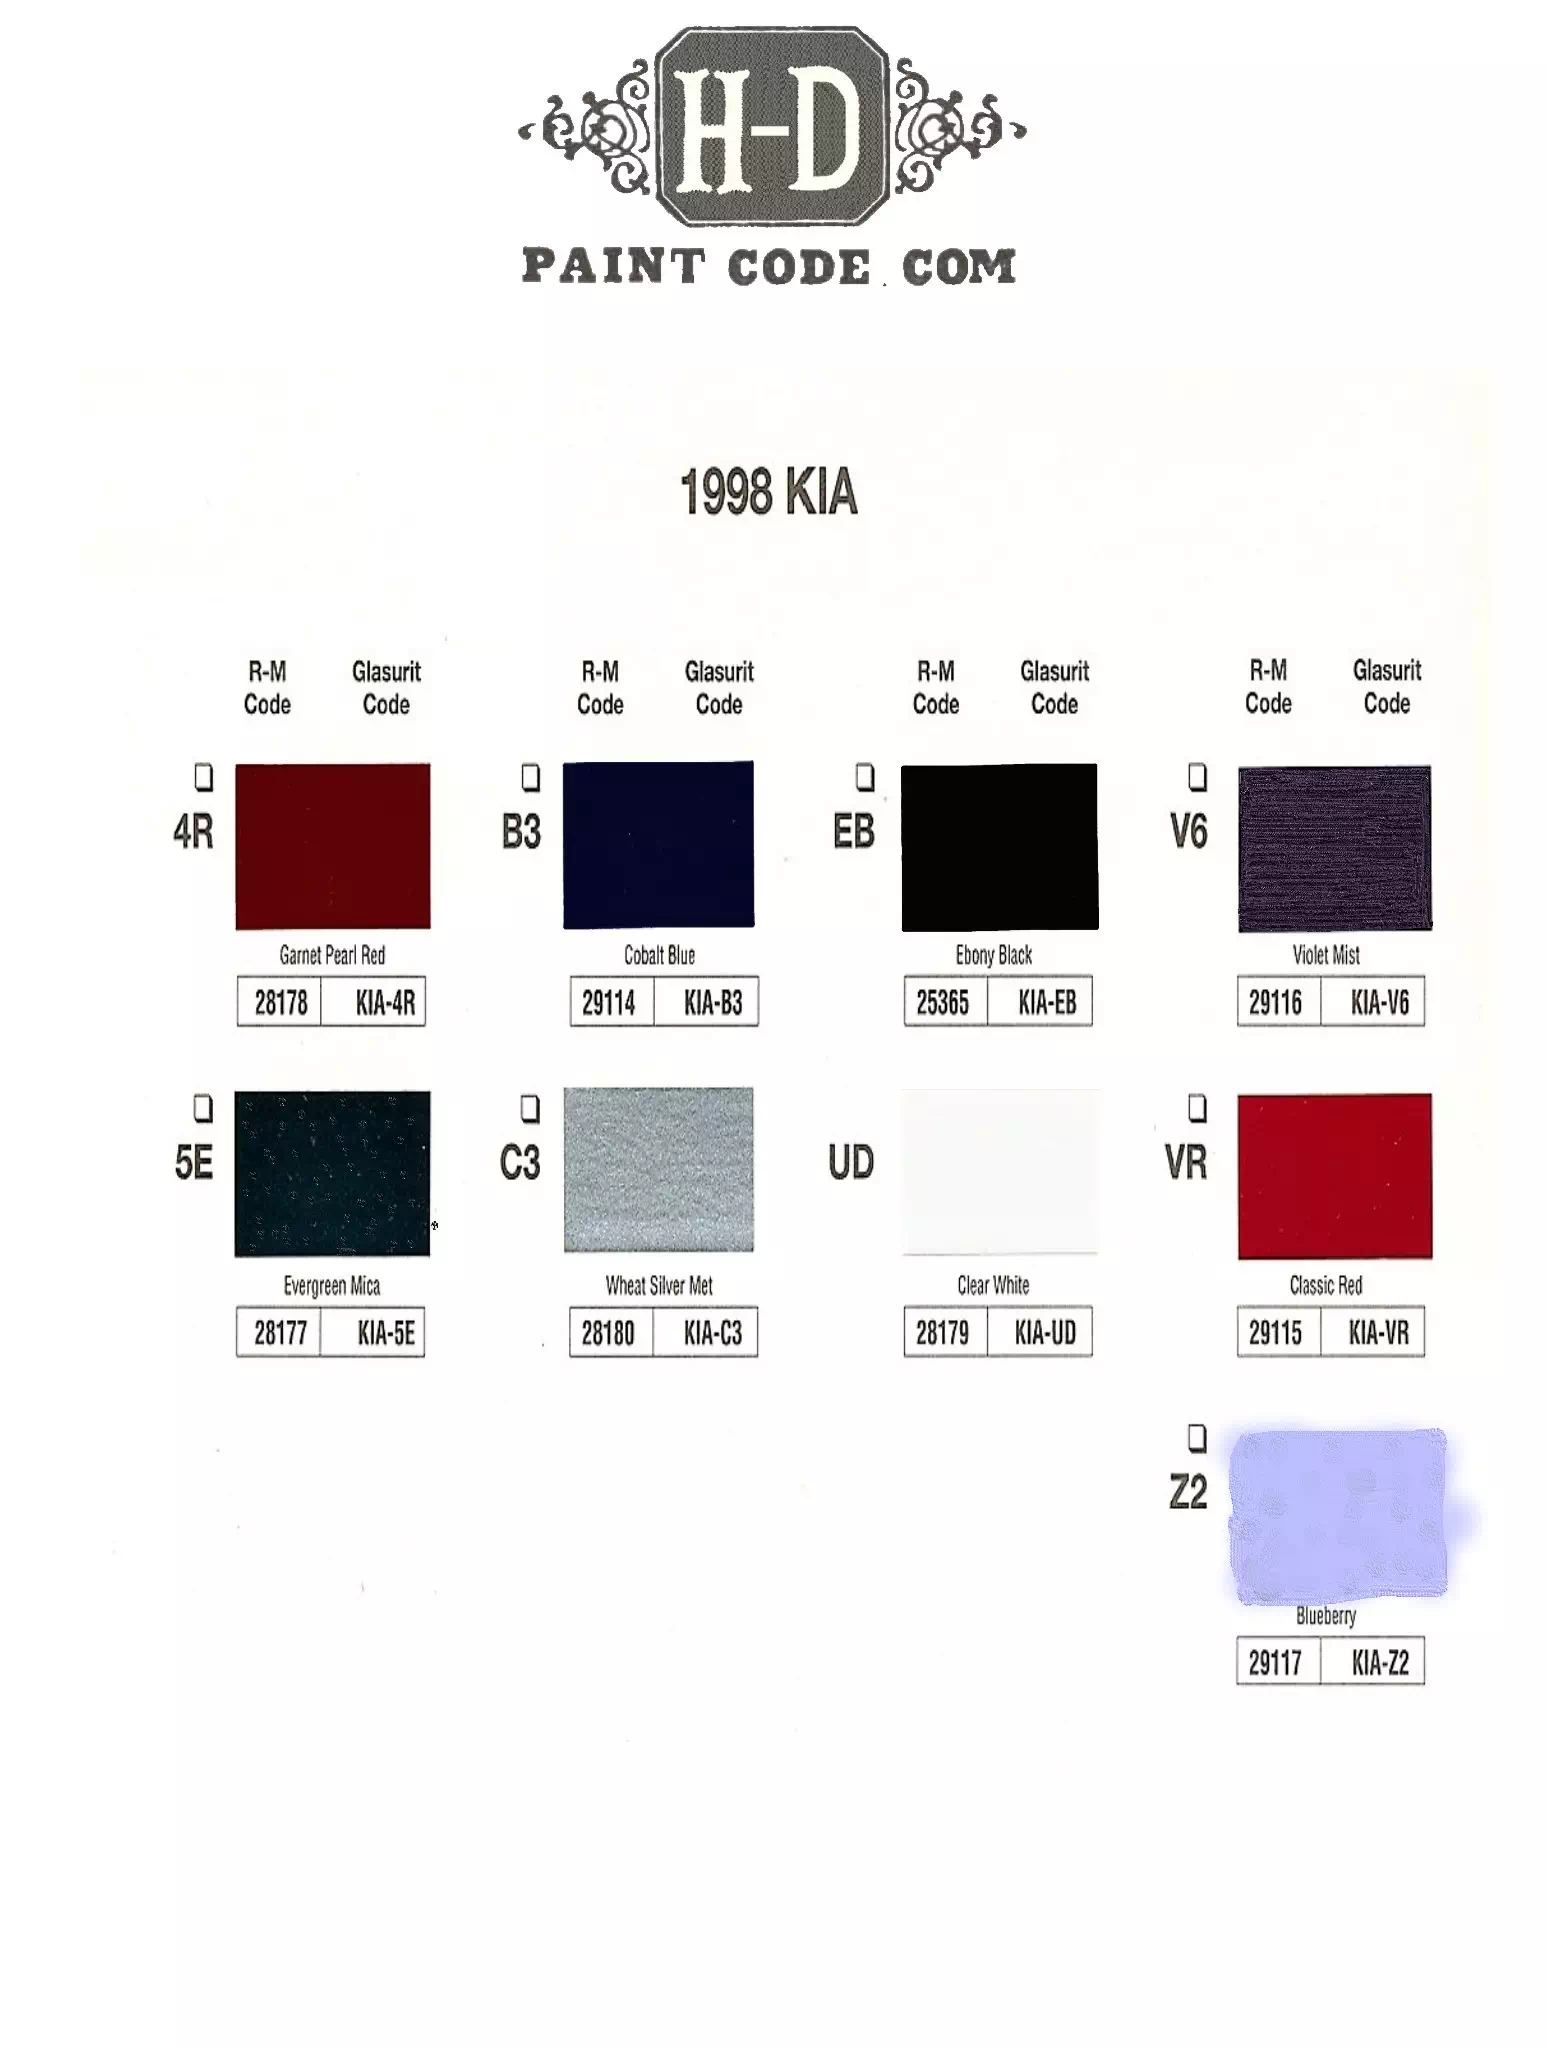 Exterior Colors used on Kia Vehicles in 1998